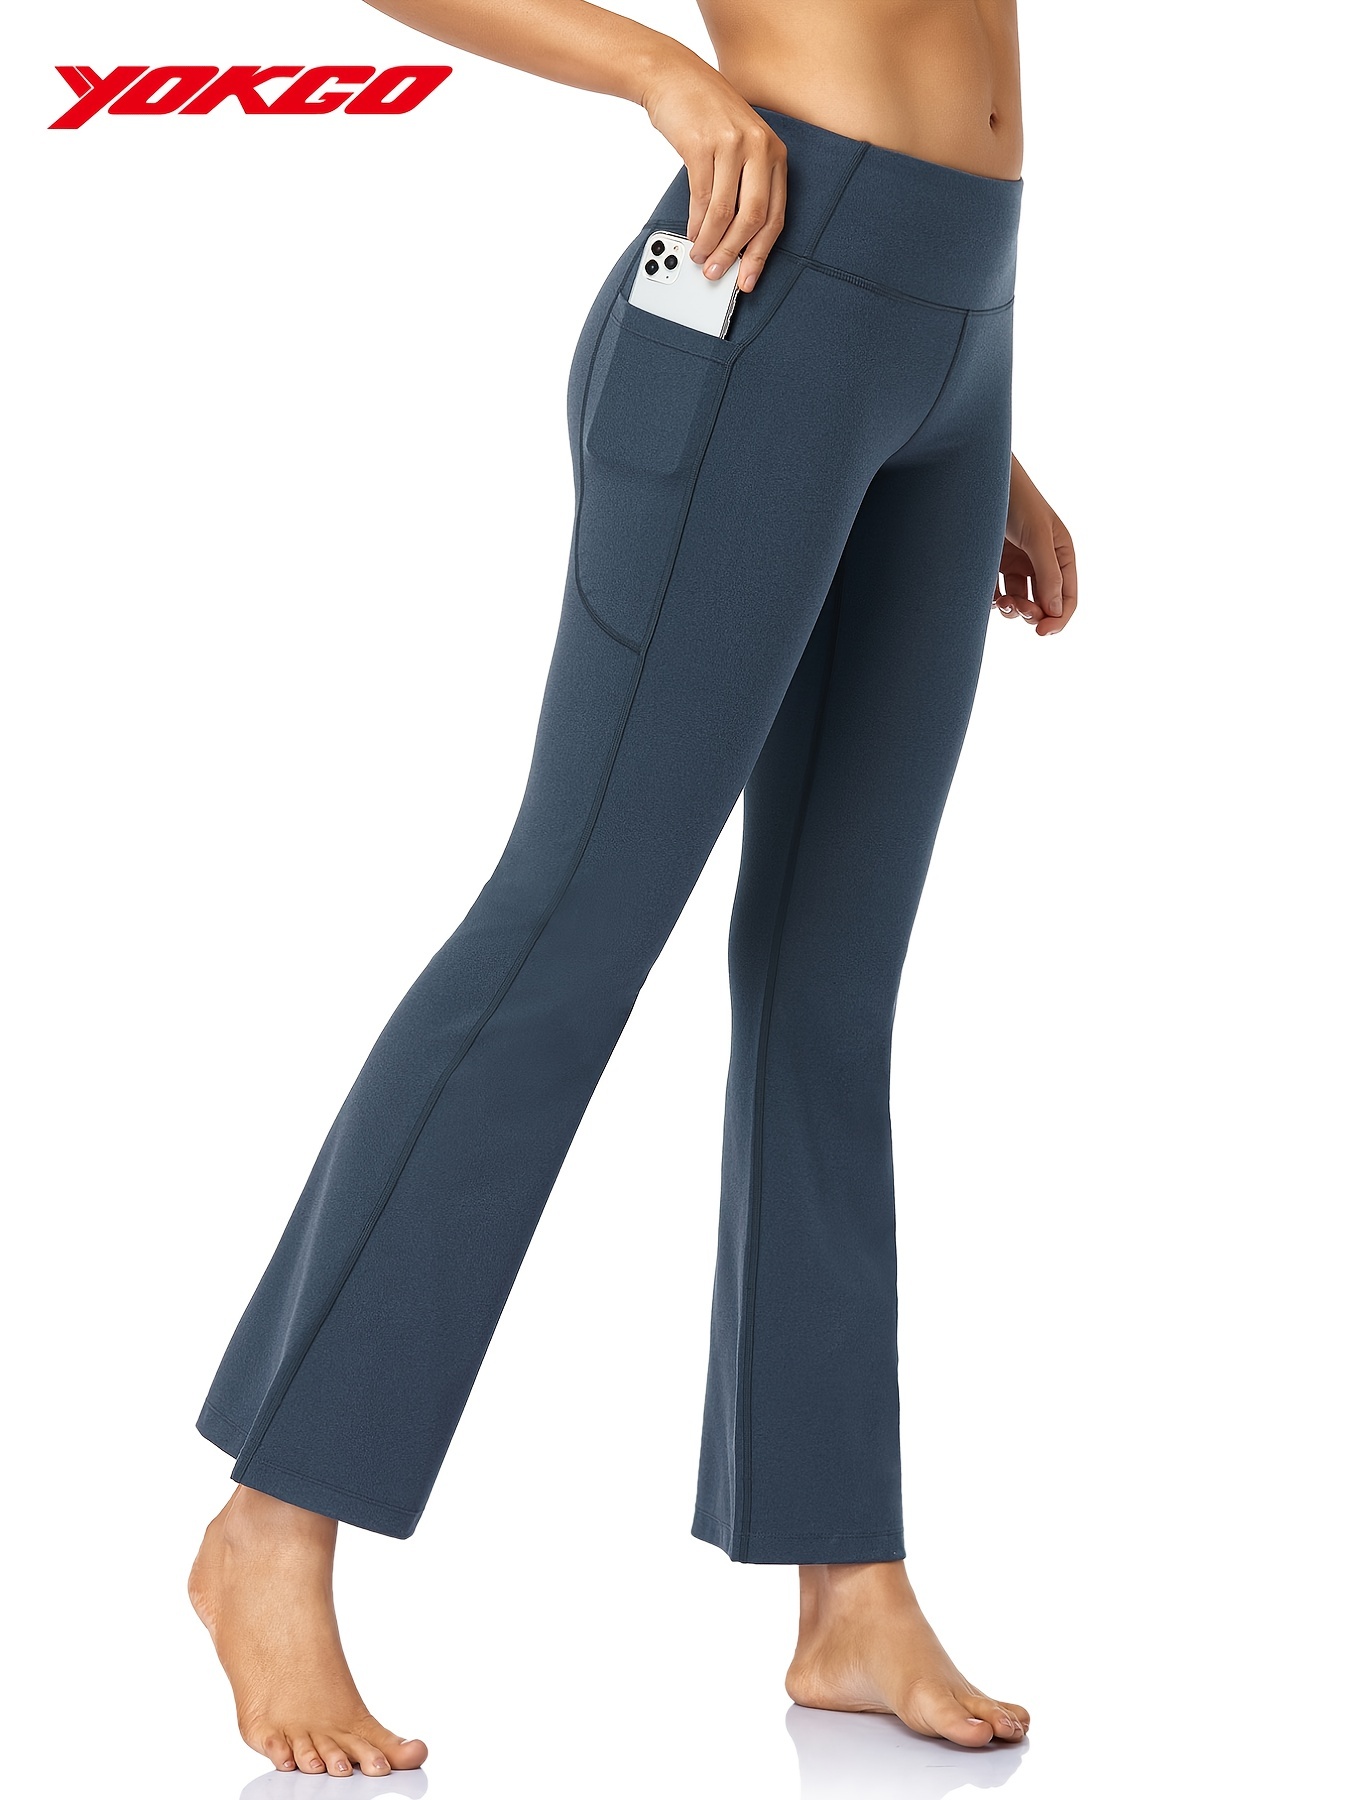 Flare Yoga Pants Stretchy High Waist Bootcut Dress Pants With